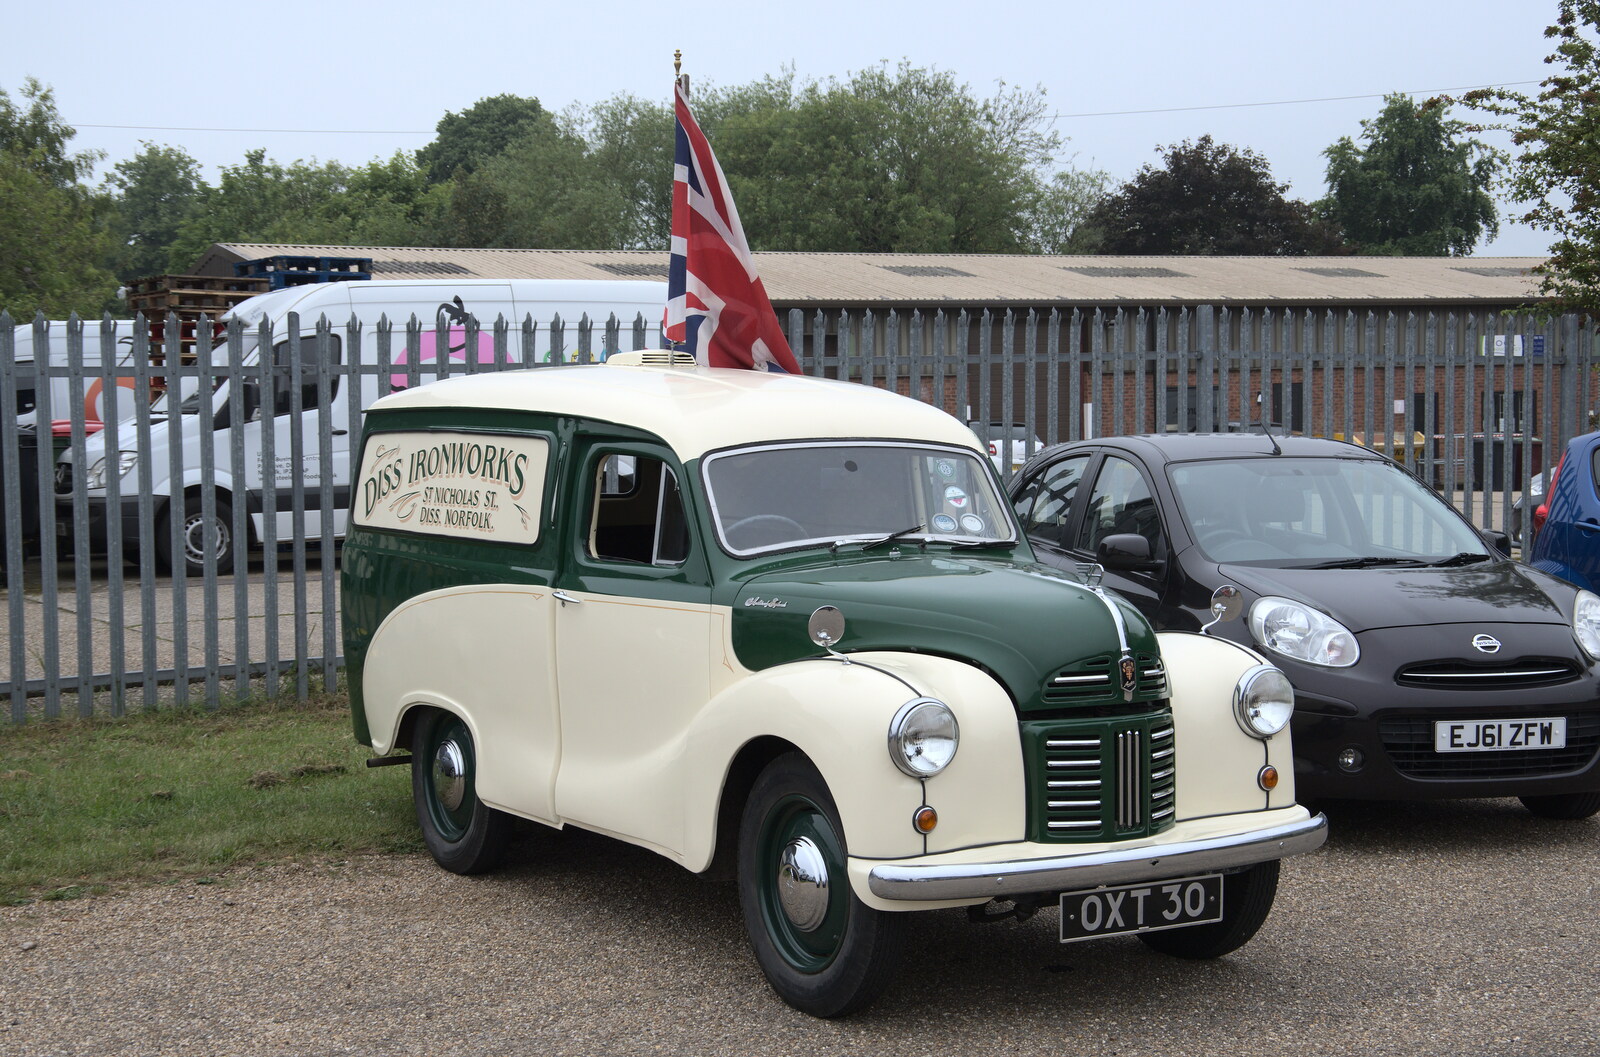 Platinum Jubilee Sunday in Palgrave, Brome and Coney Weston - 5th June 2022: Diss Ironworks has a nice old van parked outside